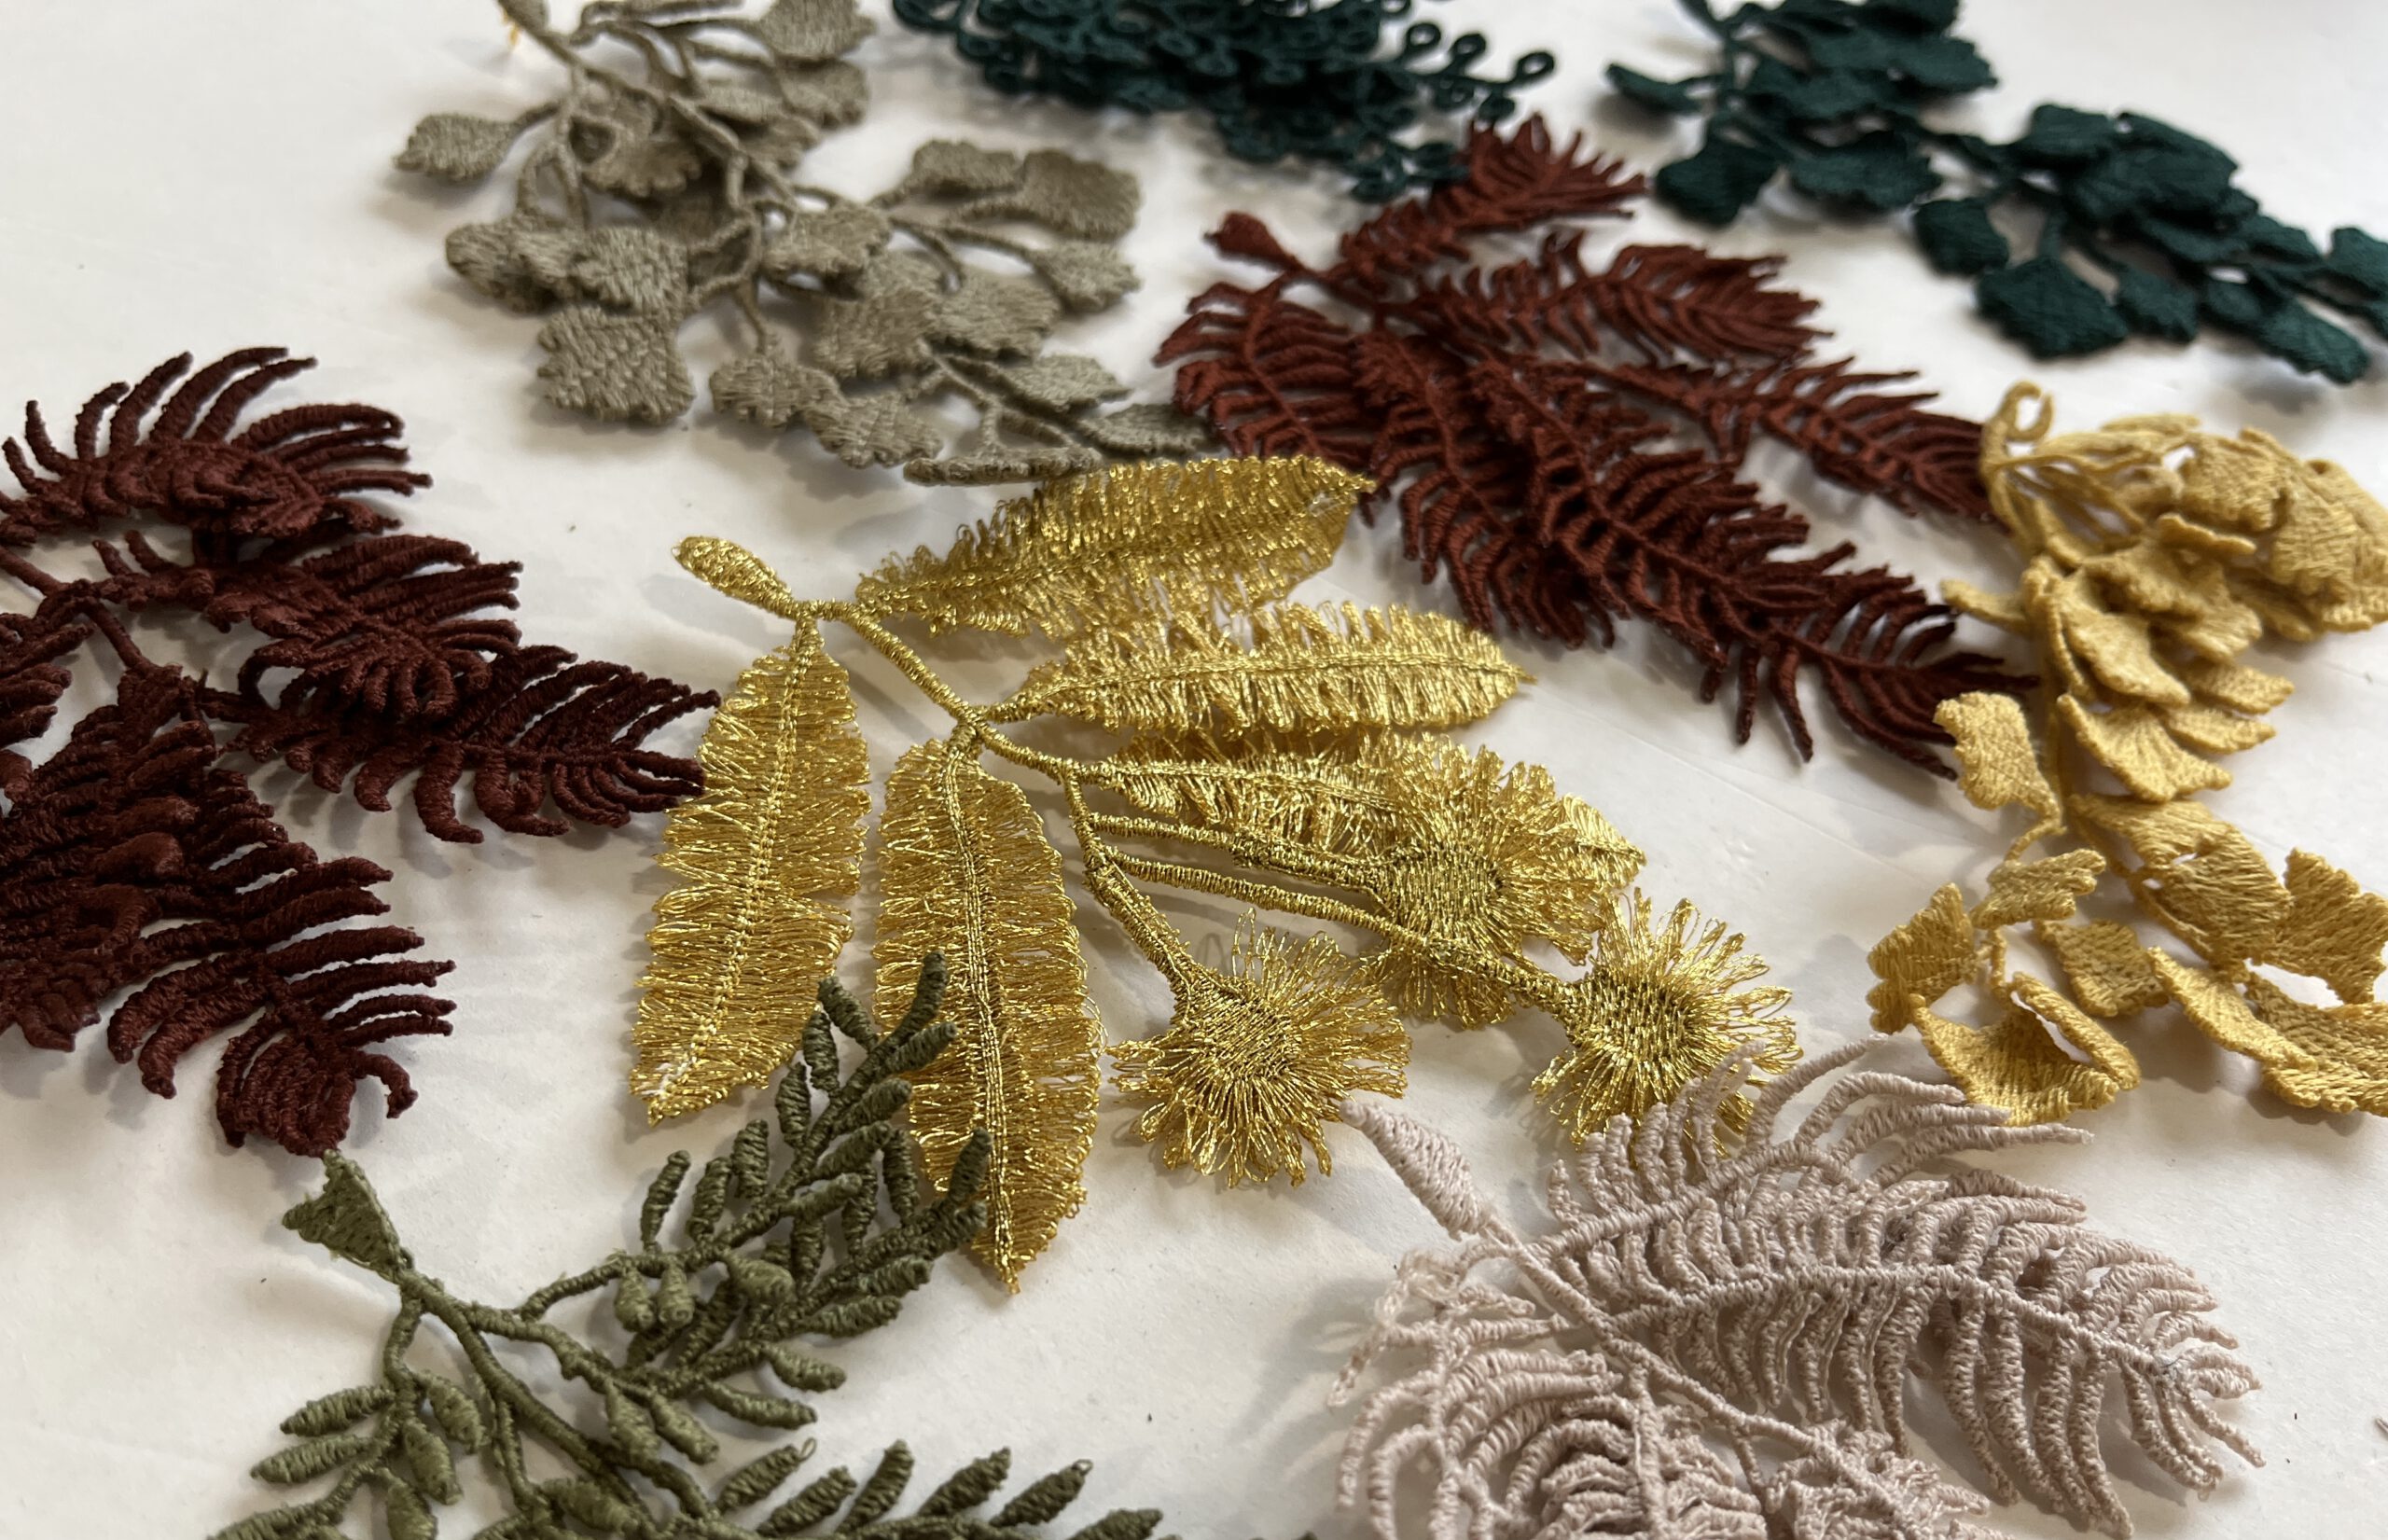 Embroidered brooches in autumn colors and in different nature inspired shapes laying on a table